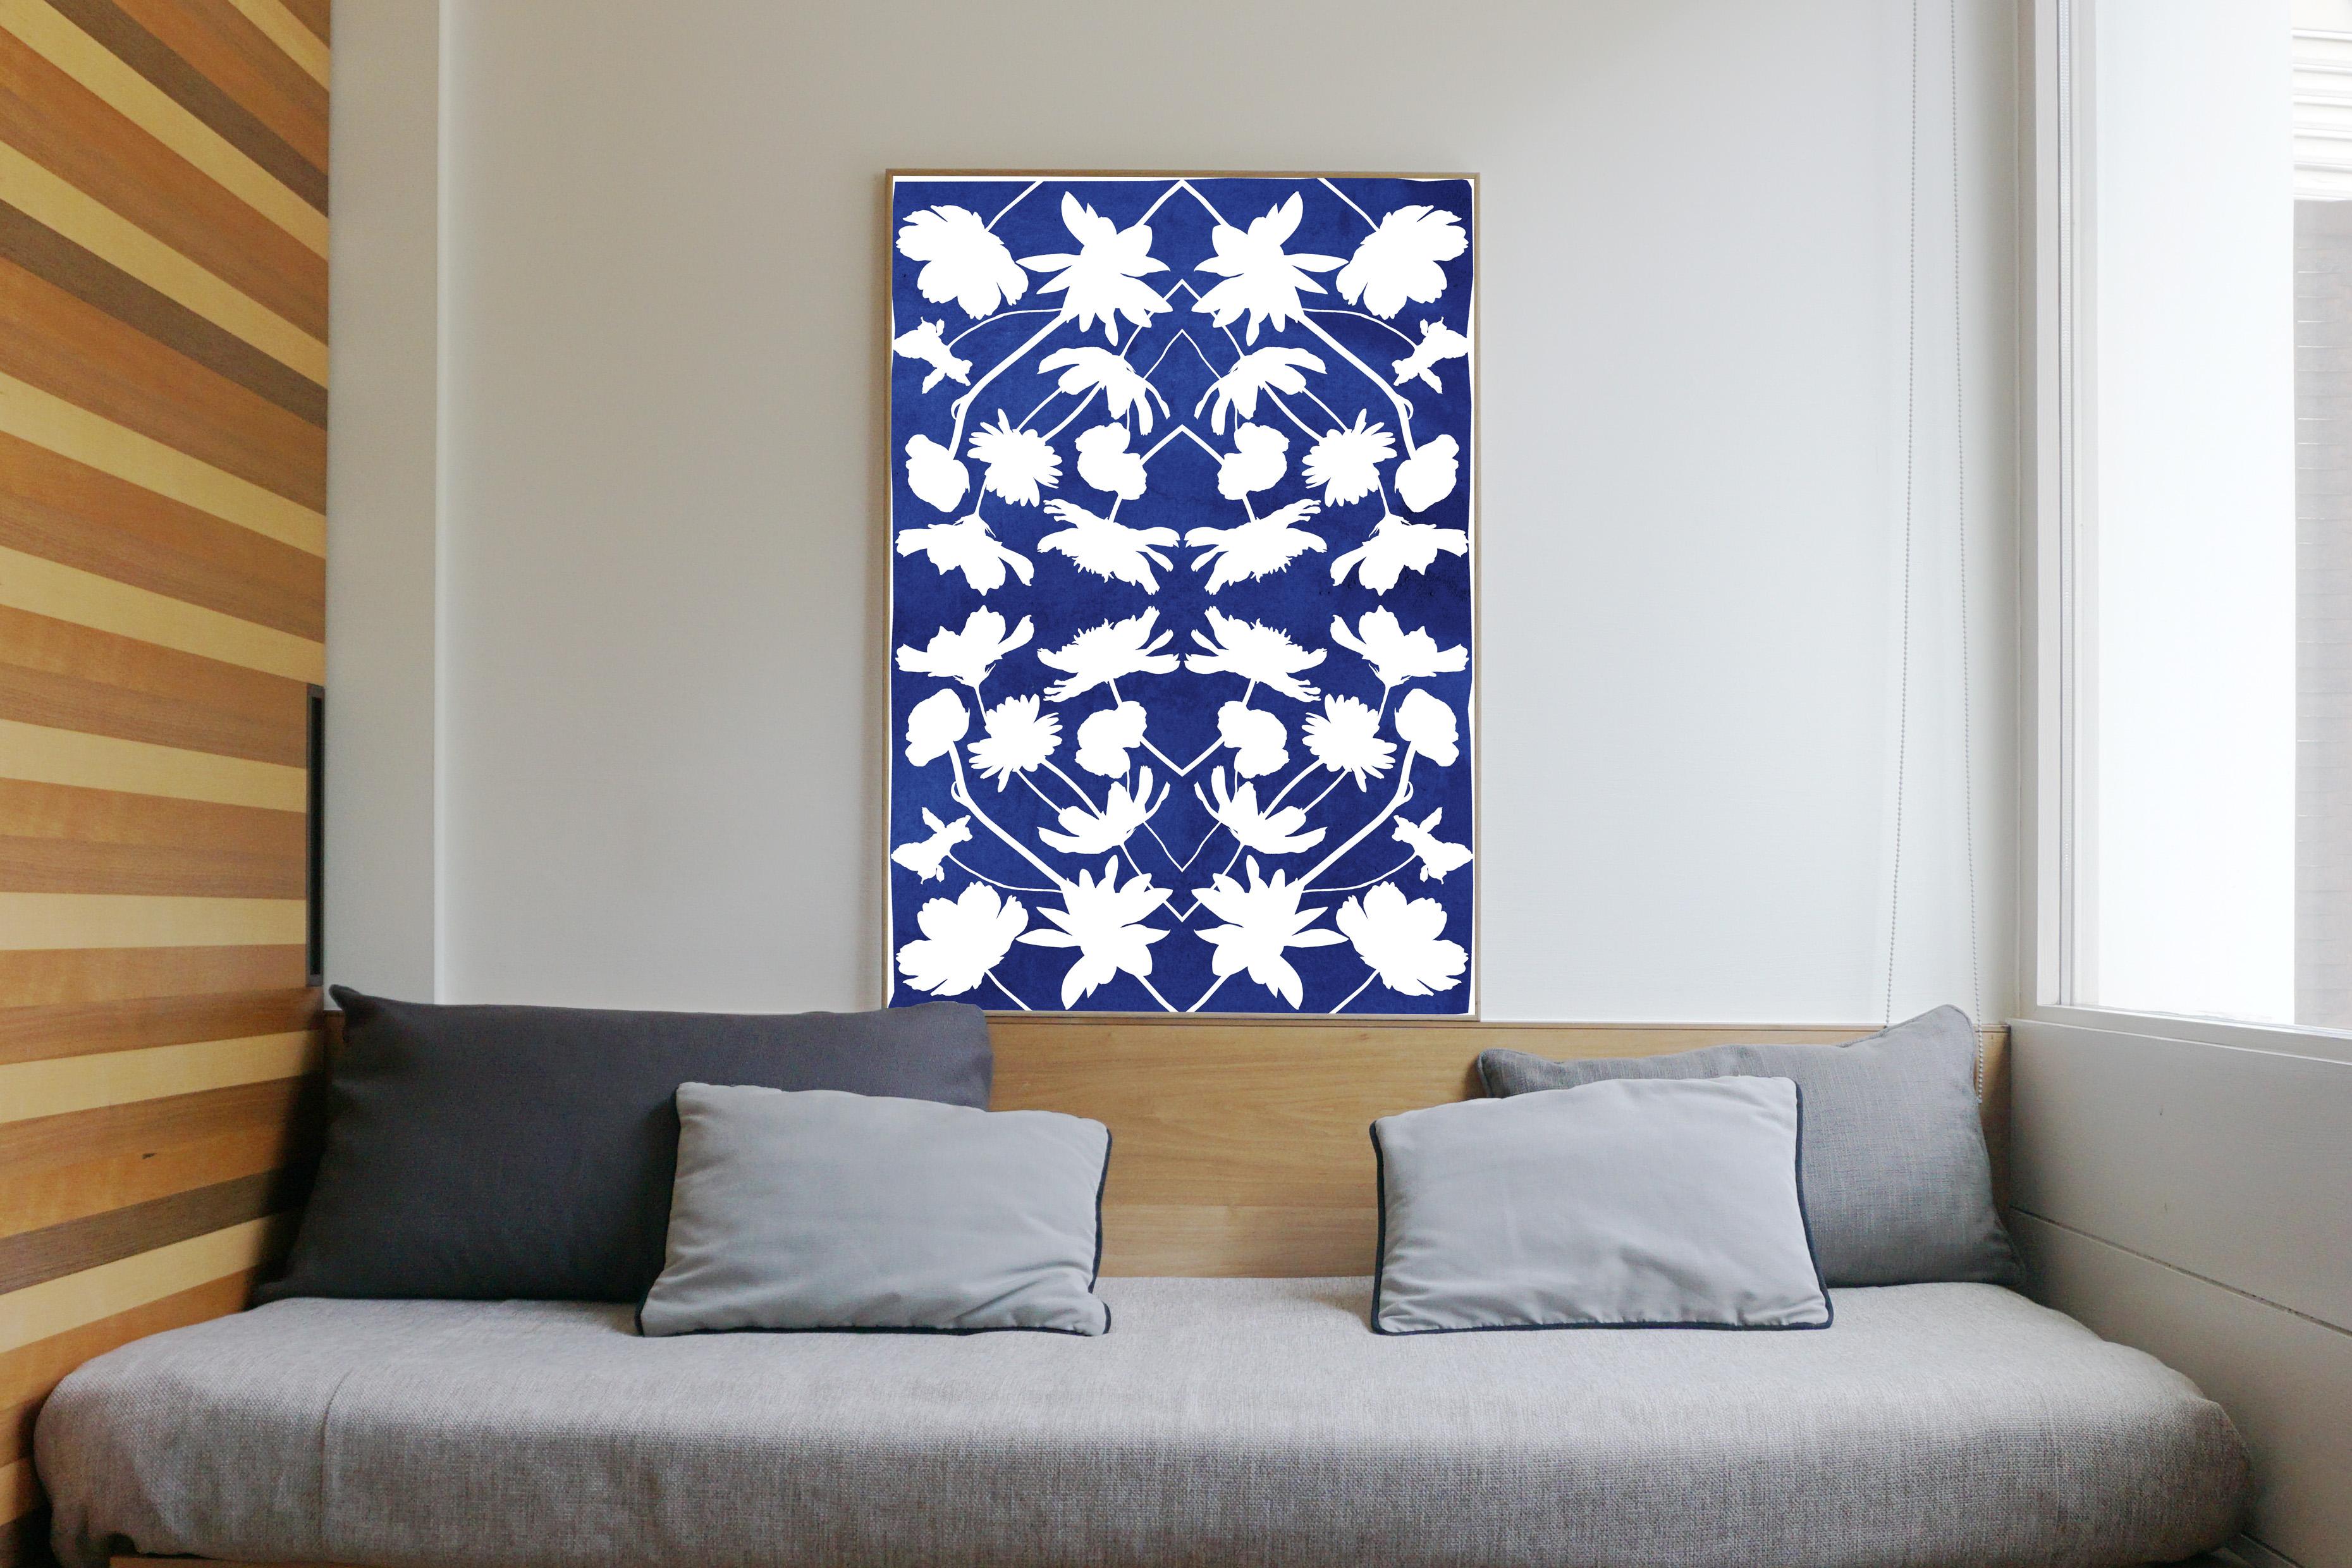 Still Life Kaleidoscope Flowers, Blue and White Cyanotype Print on Paper, Modern - Art Deco Photograph by Kind of Cyan